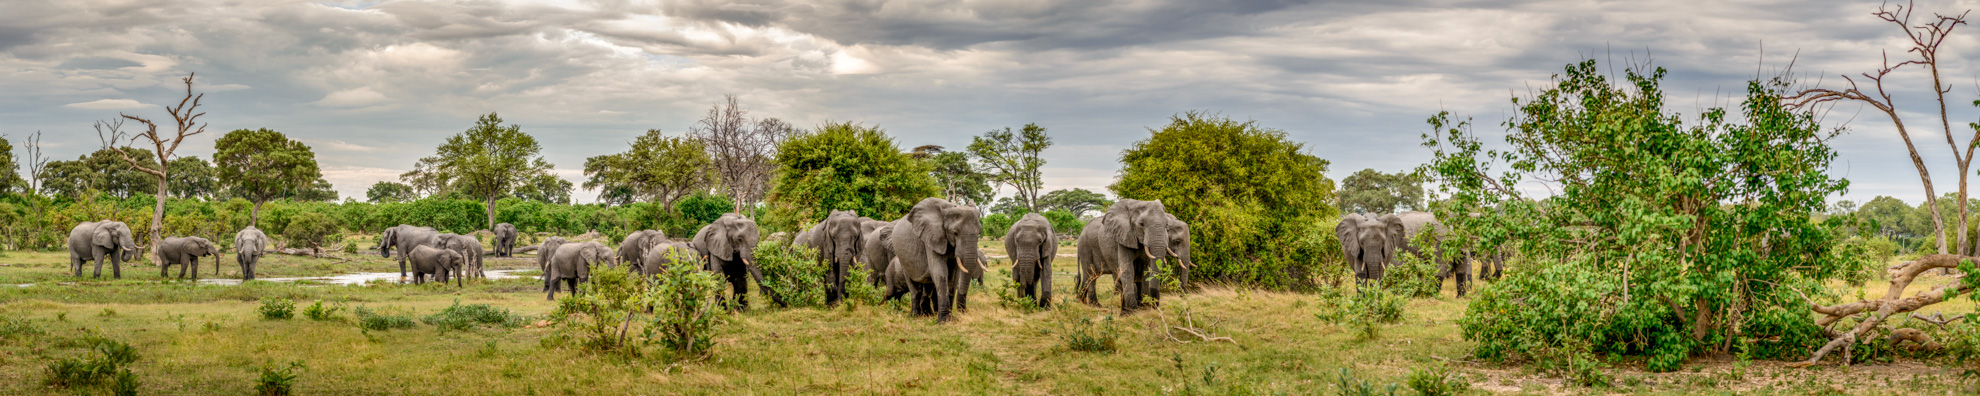 herd of elephants captured in a stitched wildlife panoramic image